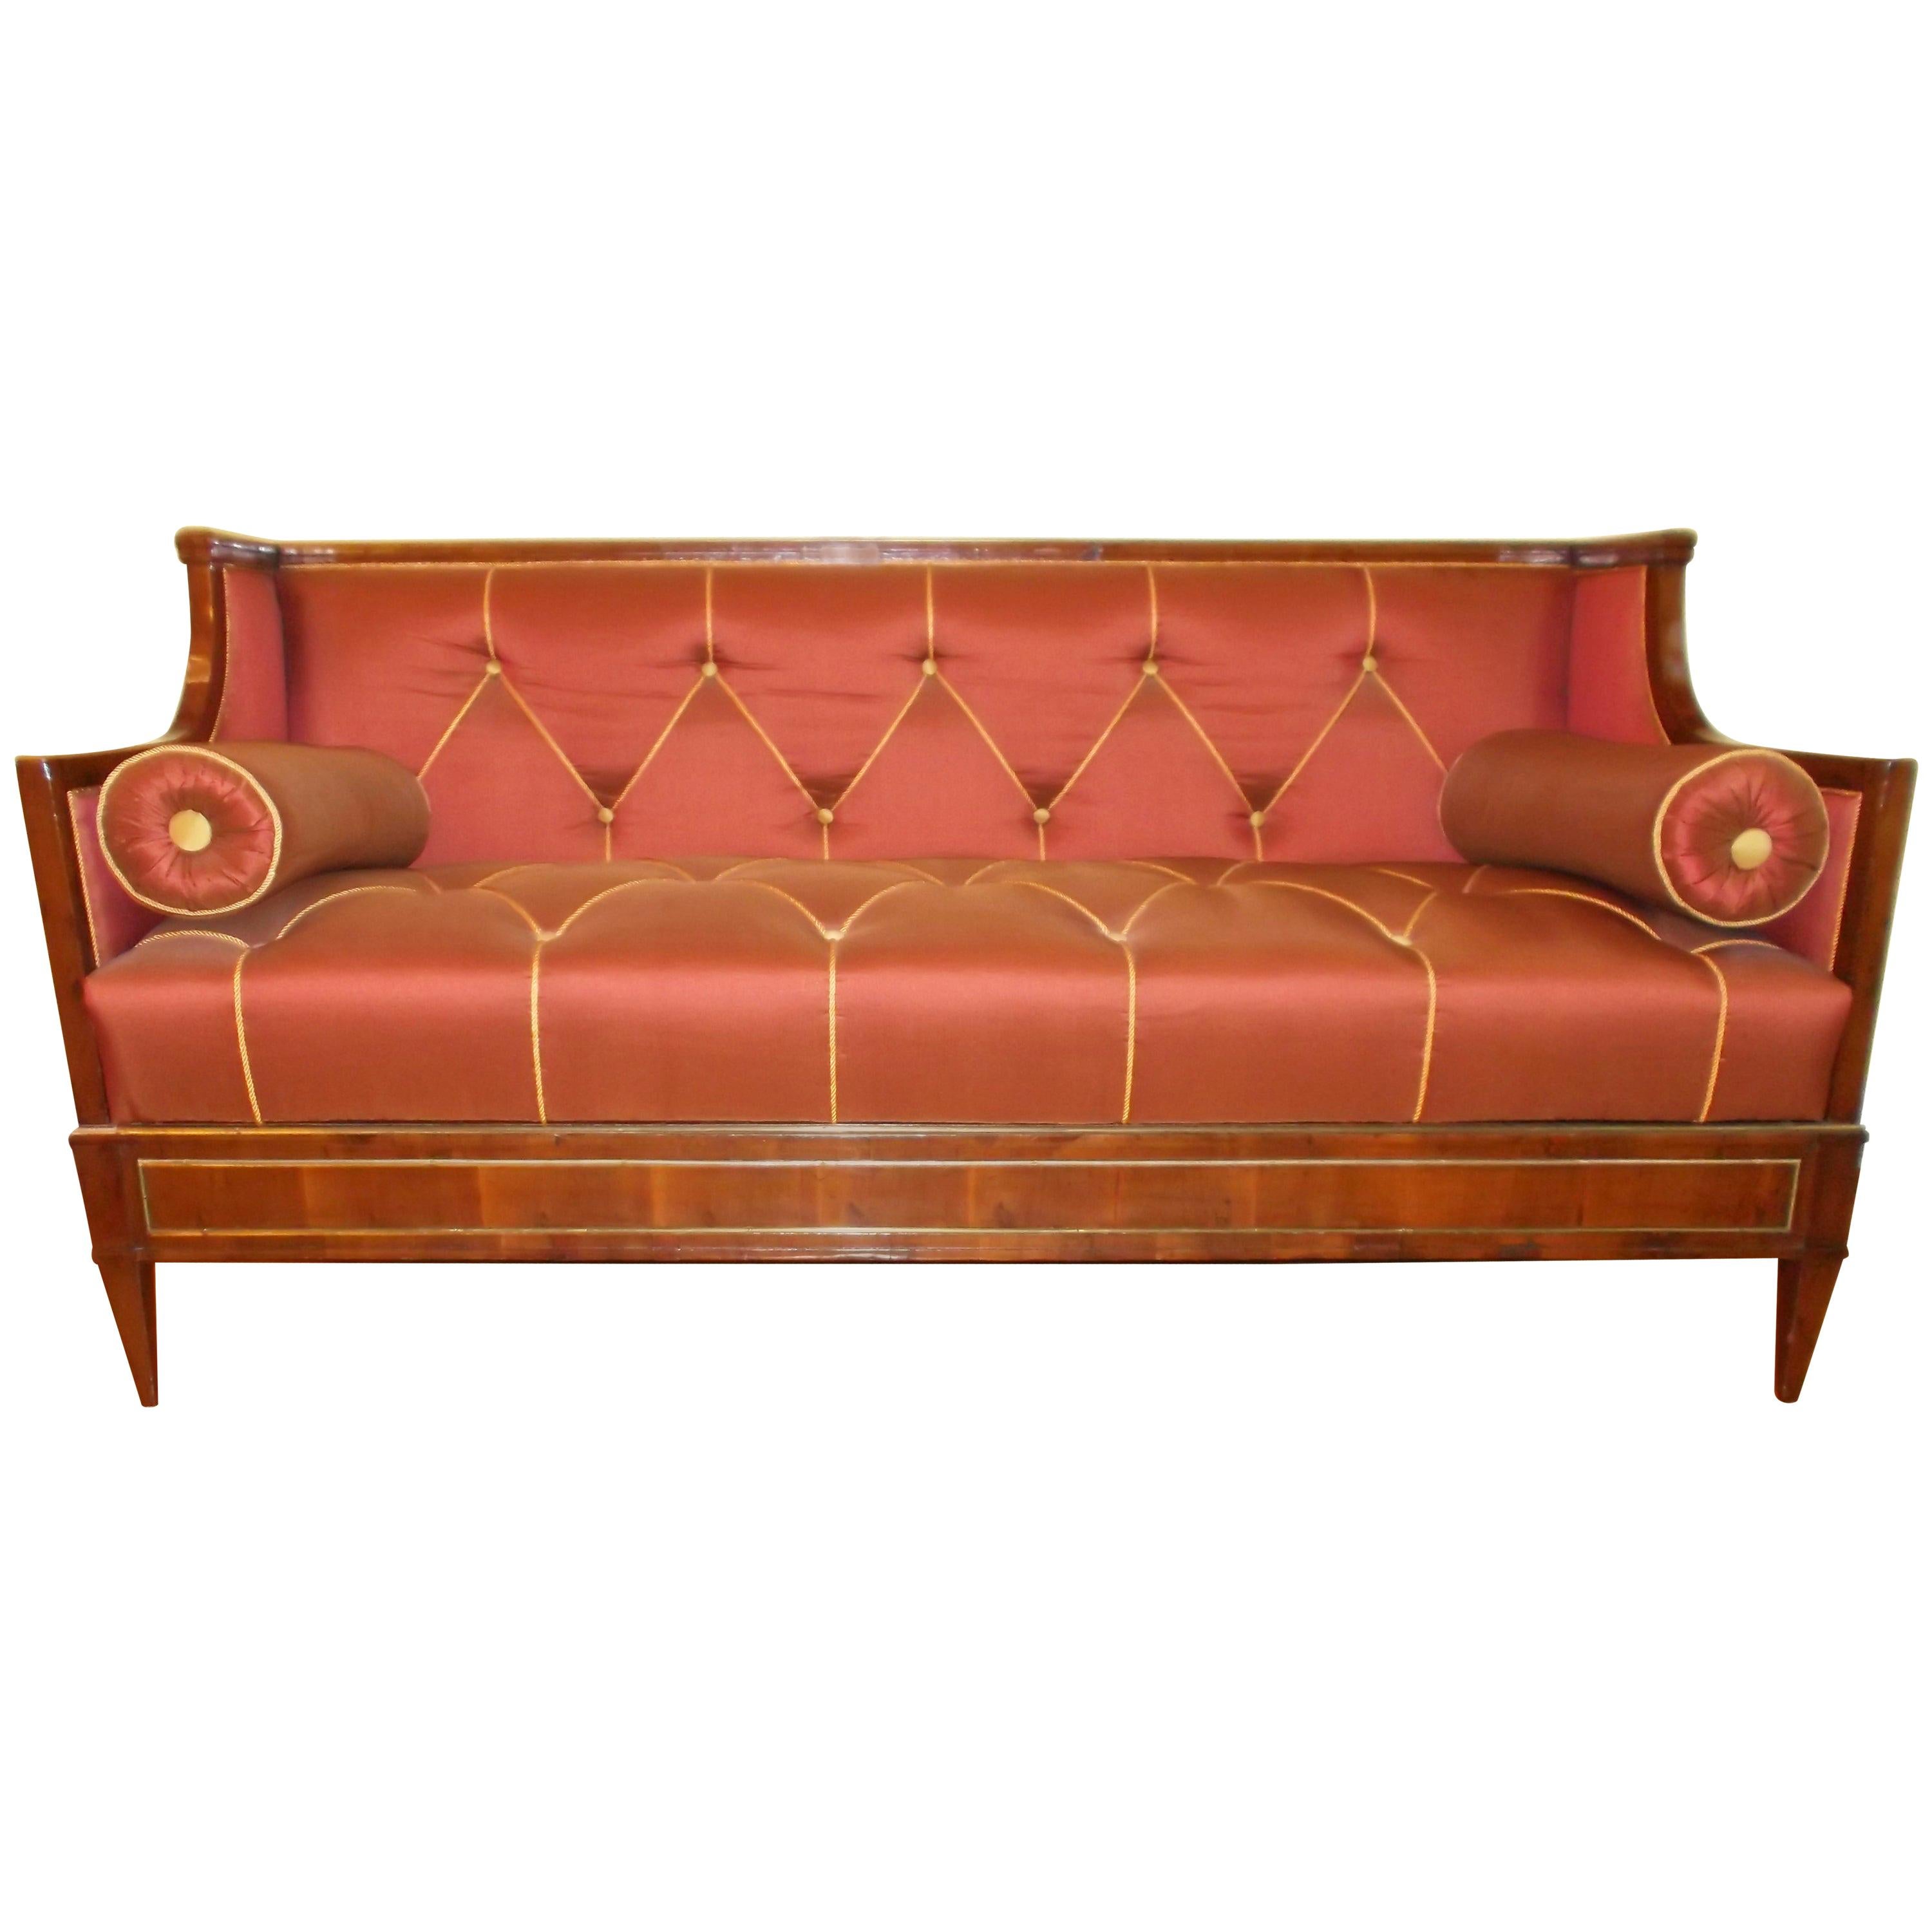 Early 19th Century Yew Wood Baltic Empire Sofa For Sale